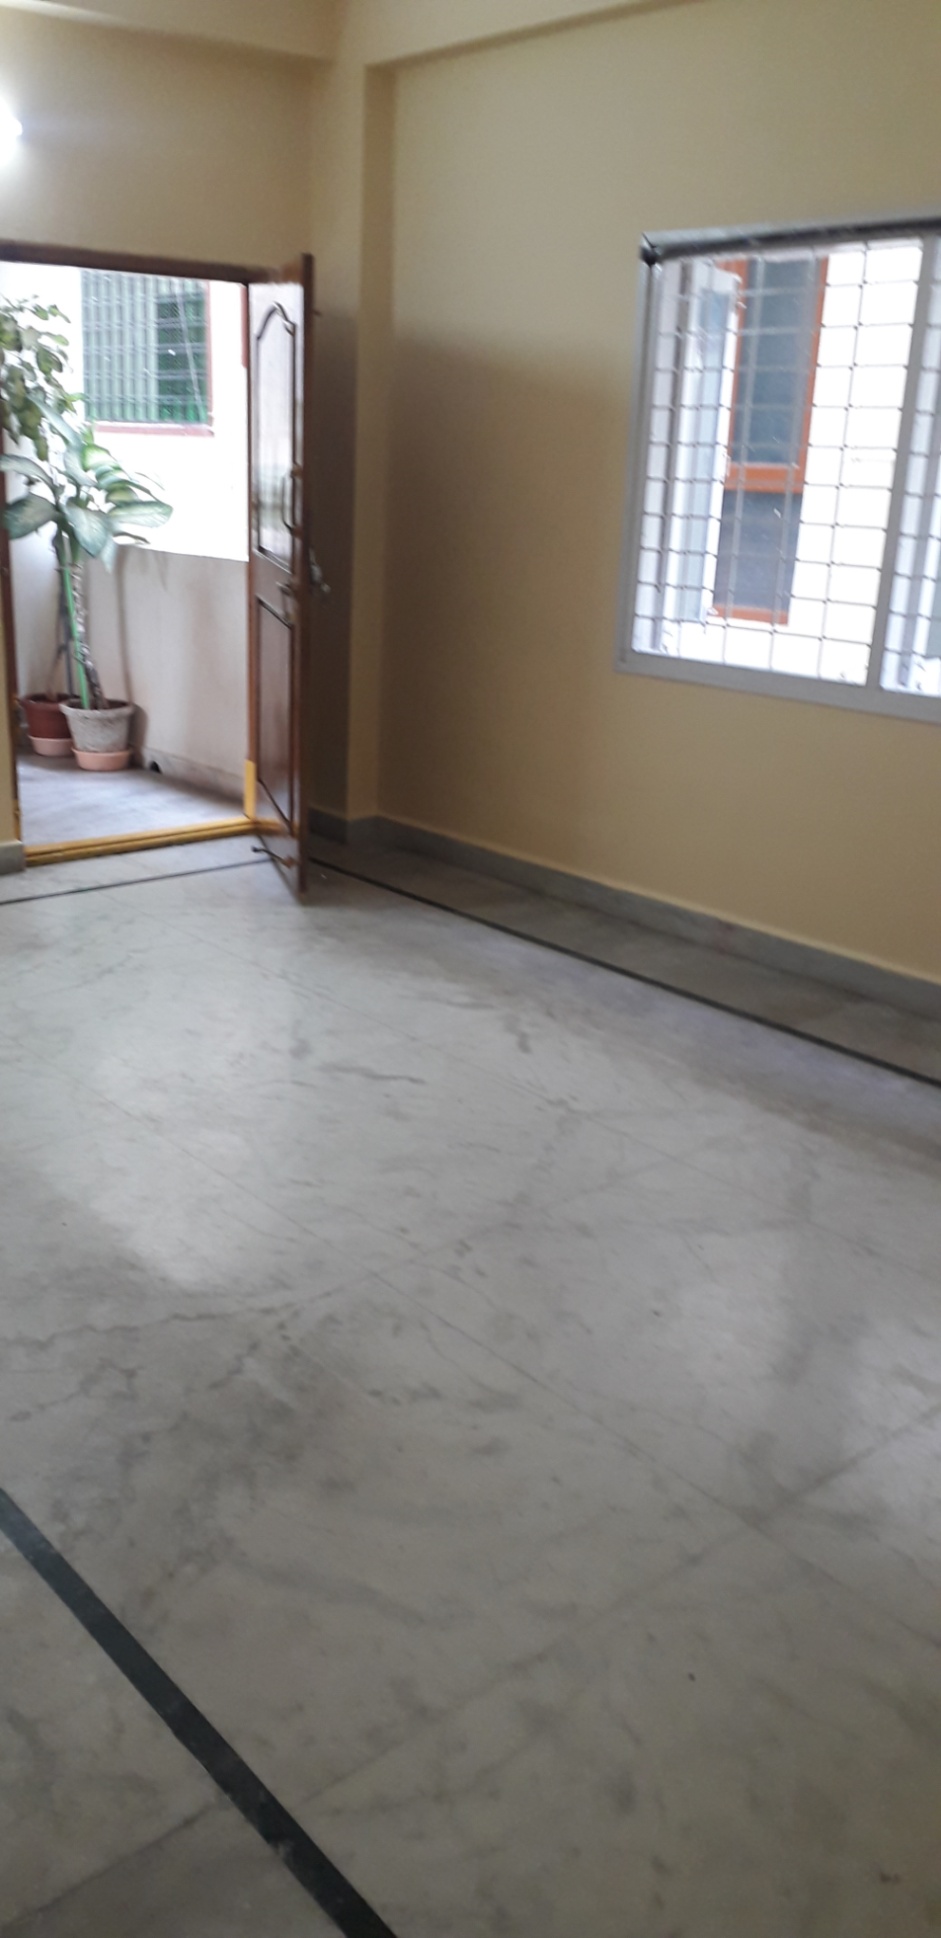 2 Bed/ 2 Bath Rent Apartment/ Flat; 1,275 sq. ft. carpet area, Semi Furnished for rent @Temple Alwal